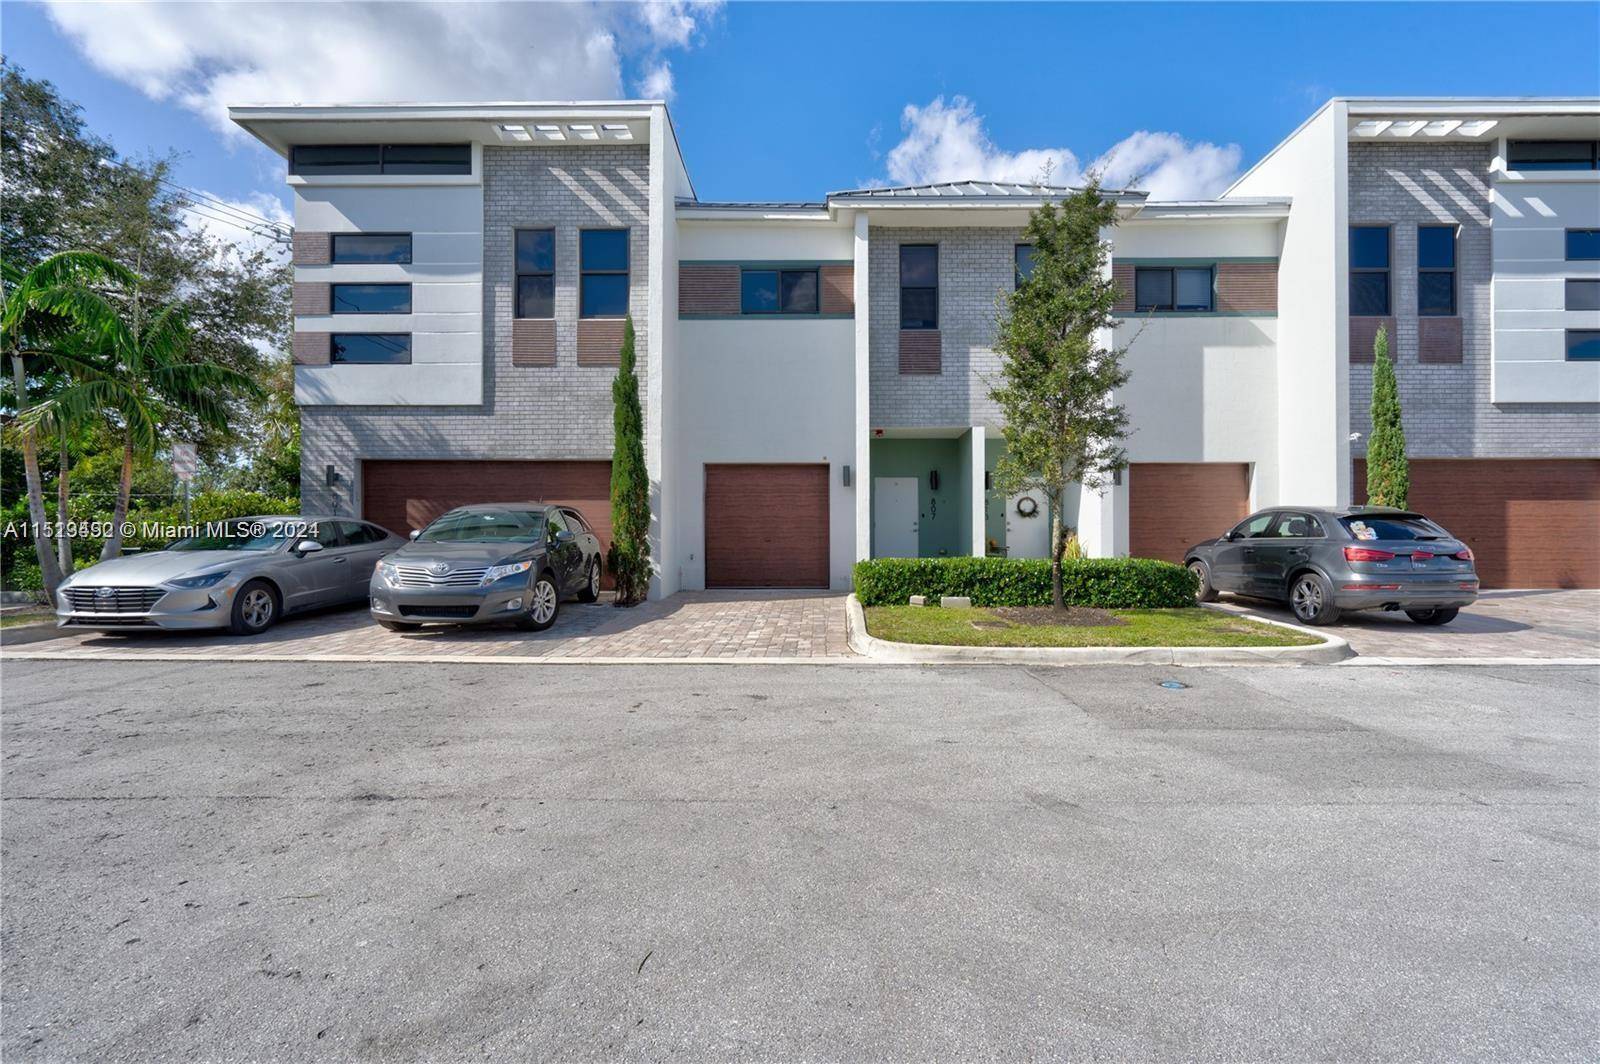 Beautiful Townhome centrally located in the sought out neighborhood of Plantation.